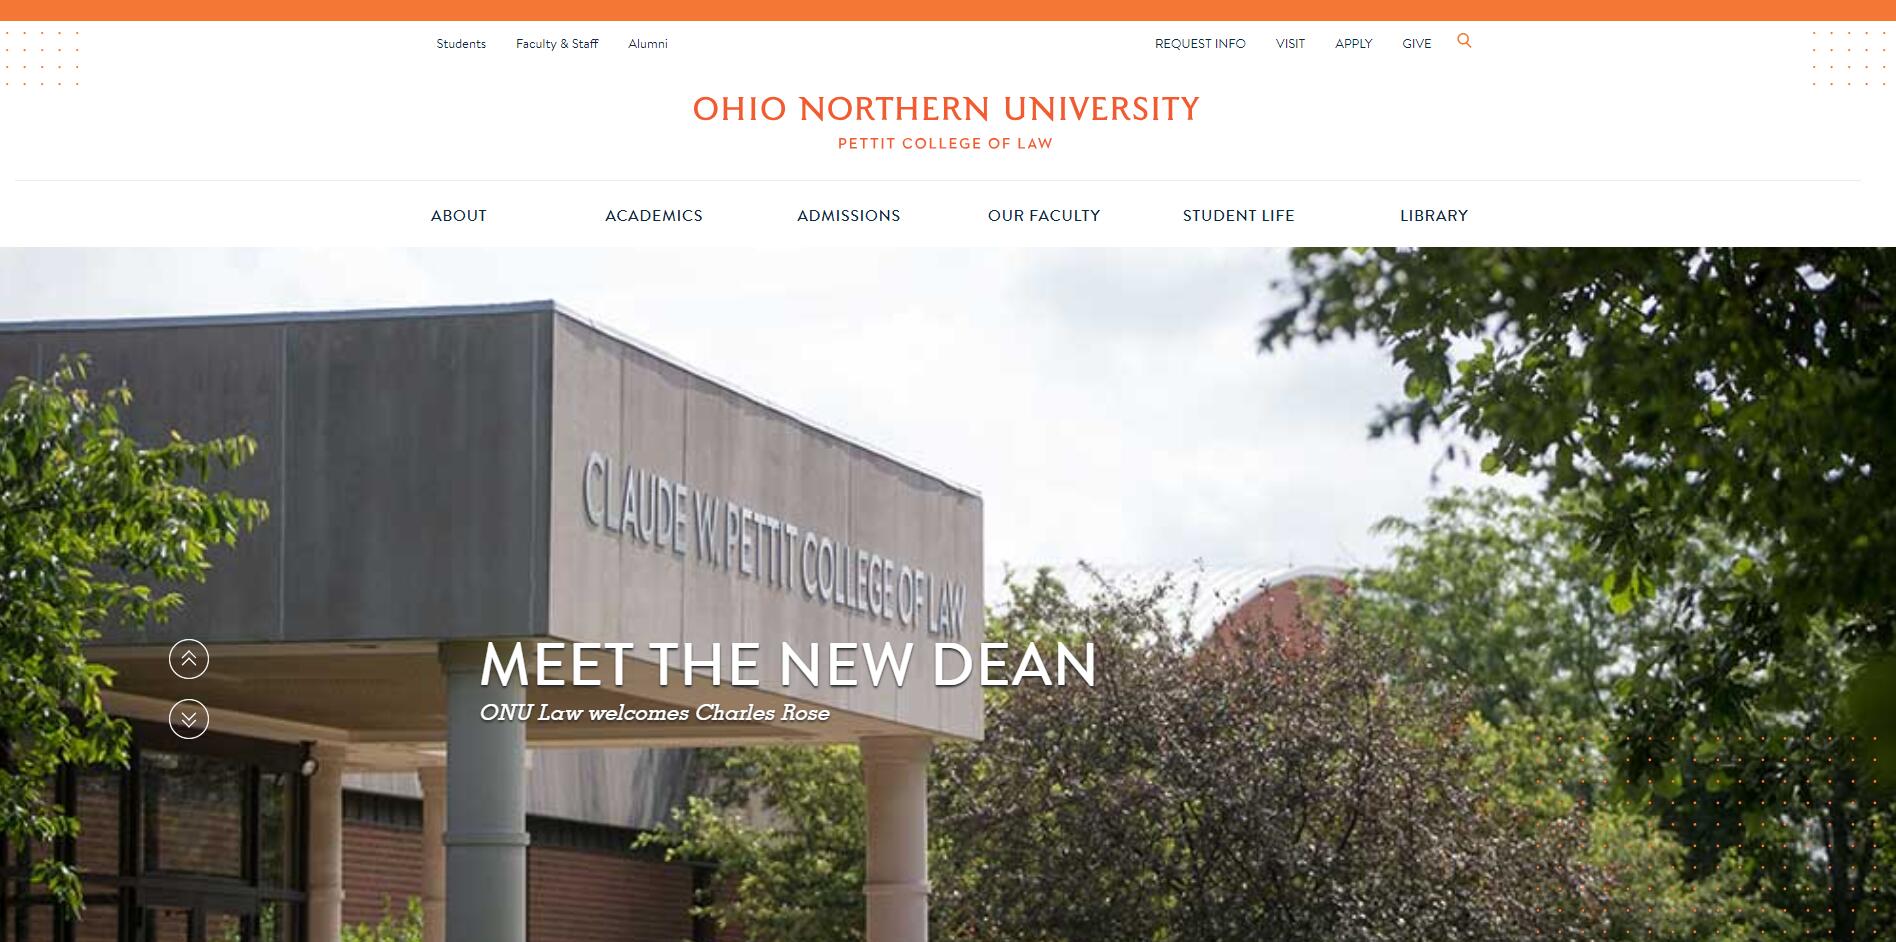 The Claude W. Pettit College of Law at Ohio Northern University